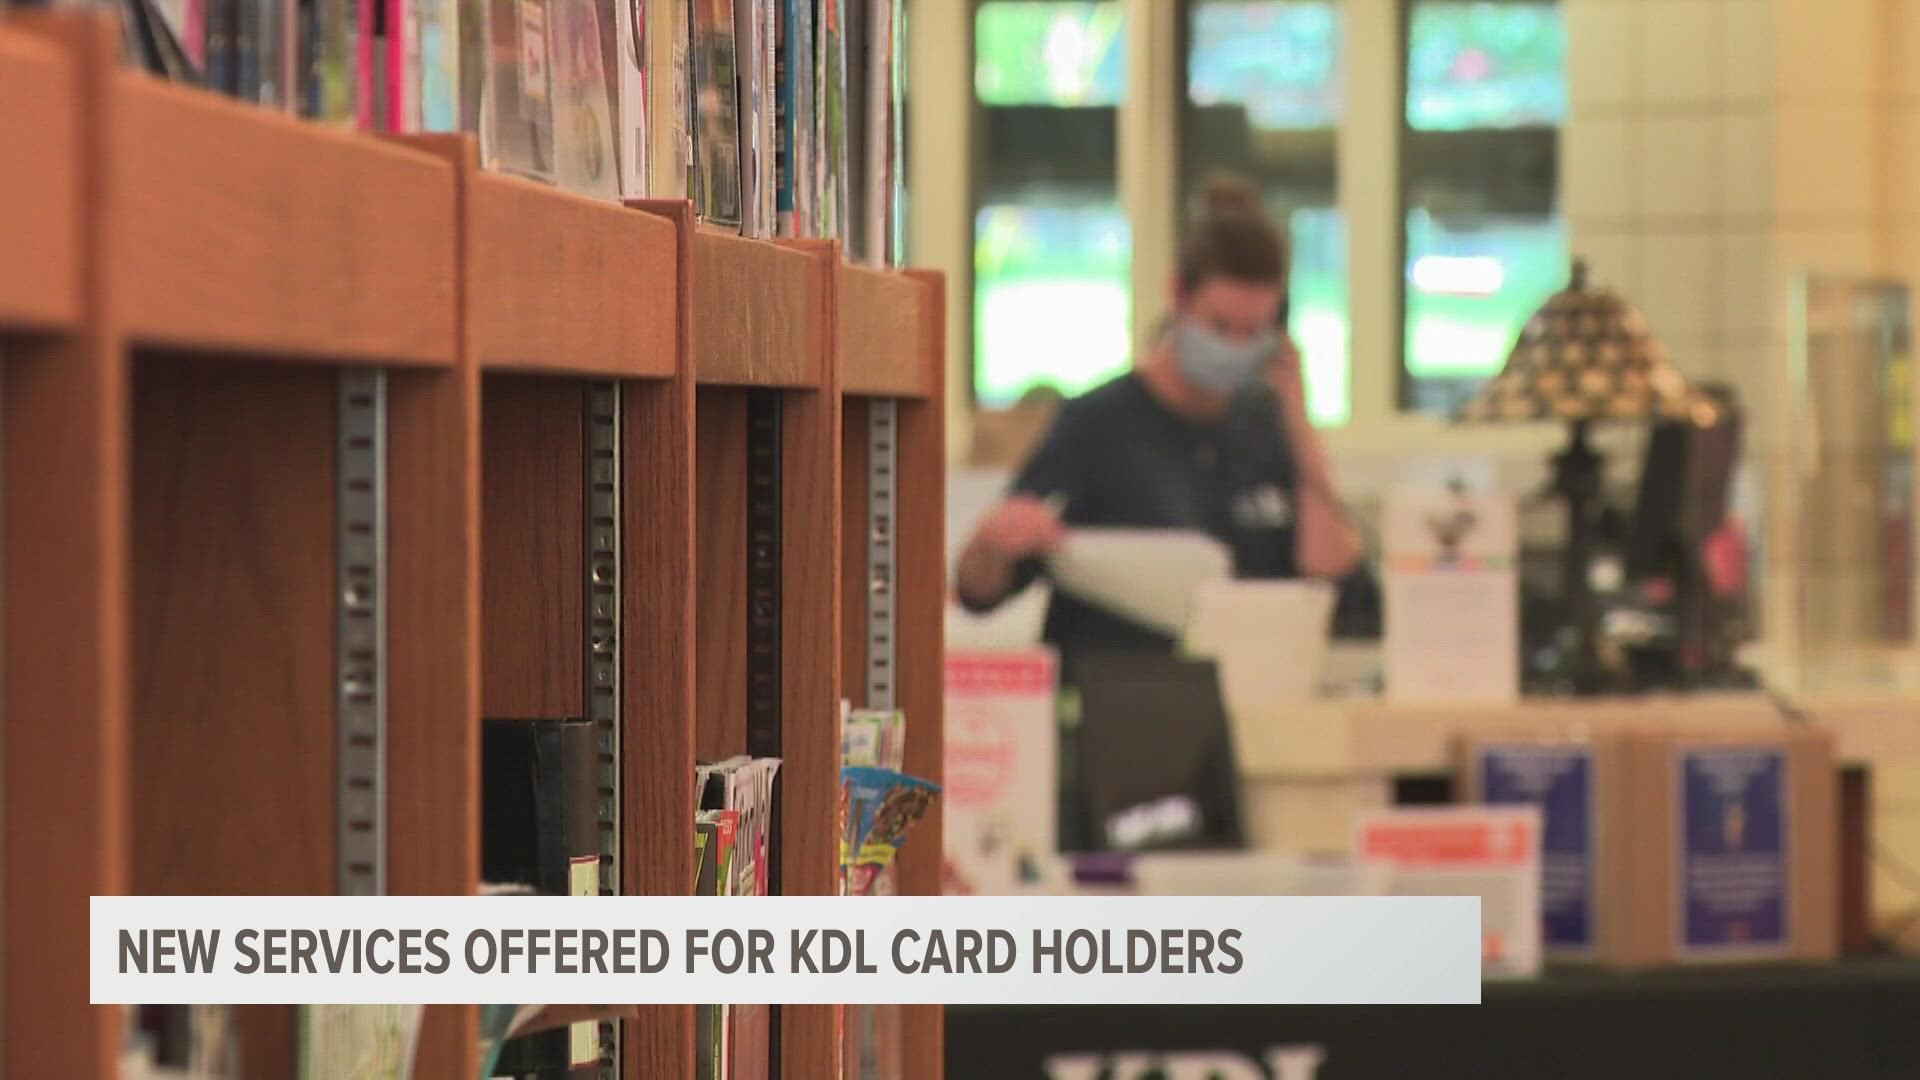 The library has recently introduced some new services, including a movie streaming service called Kanopy which includes more than 30,000 movies for card holders.